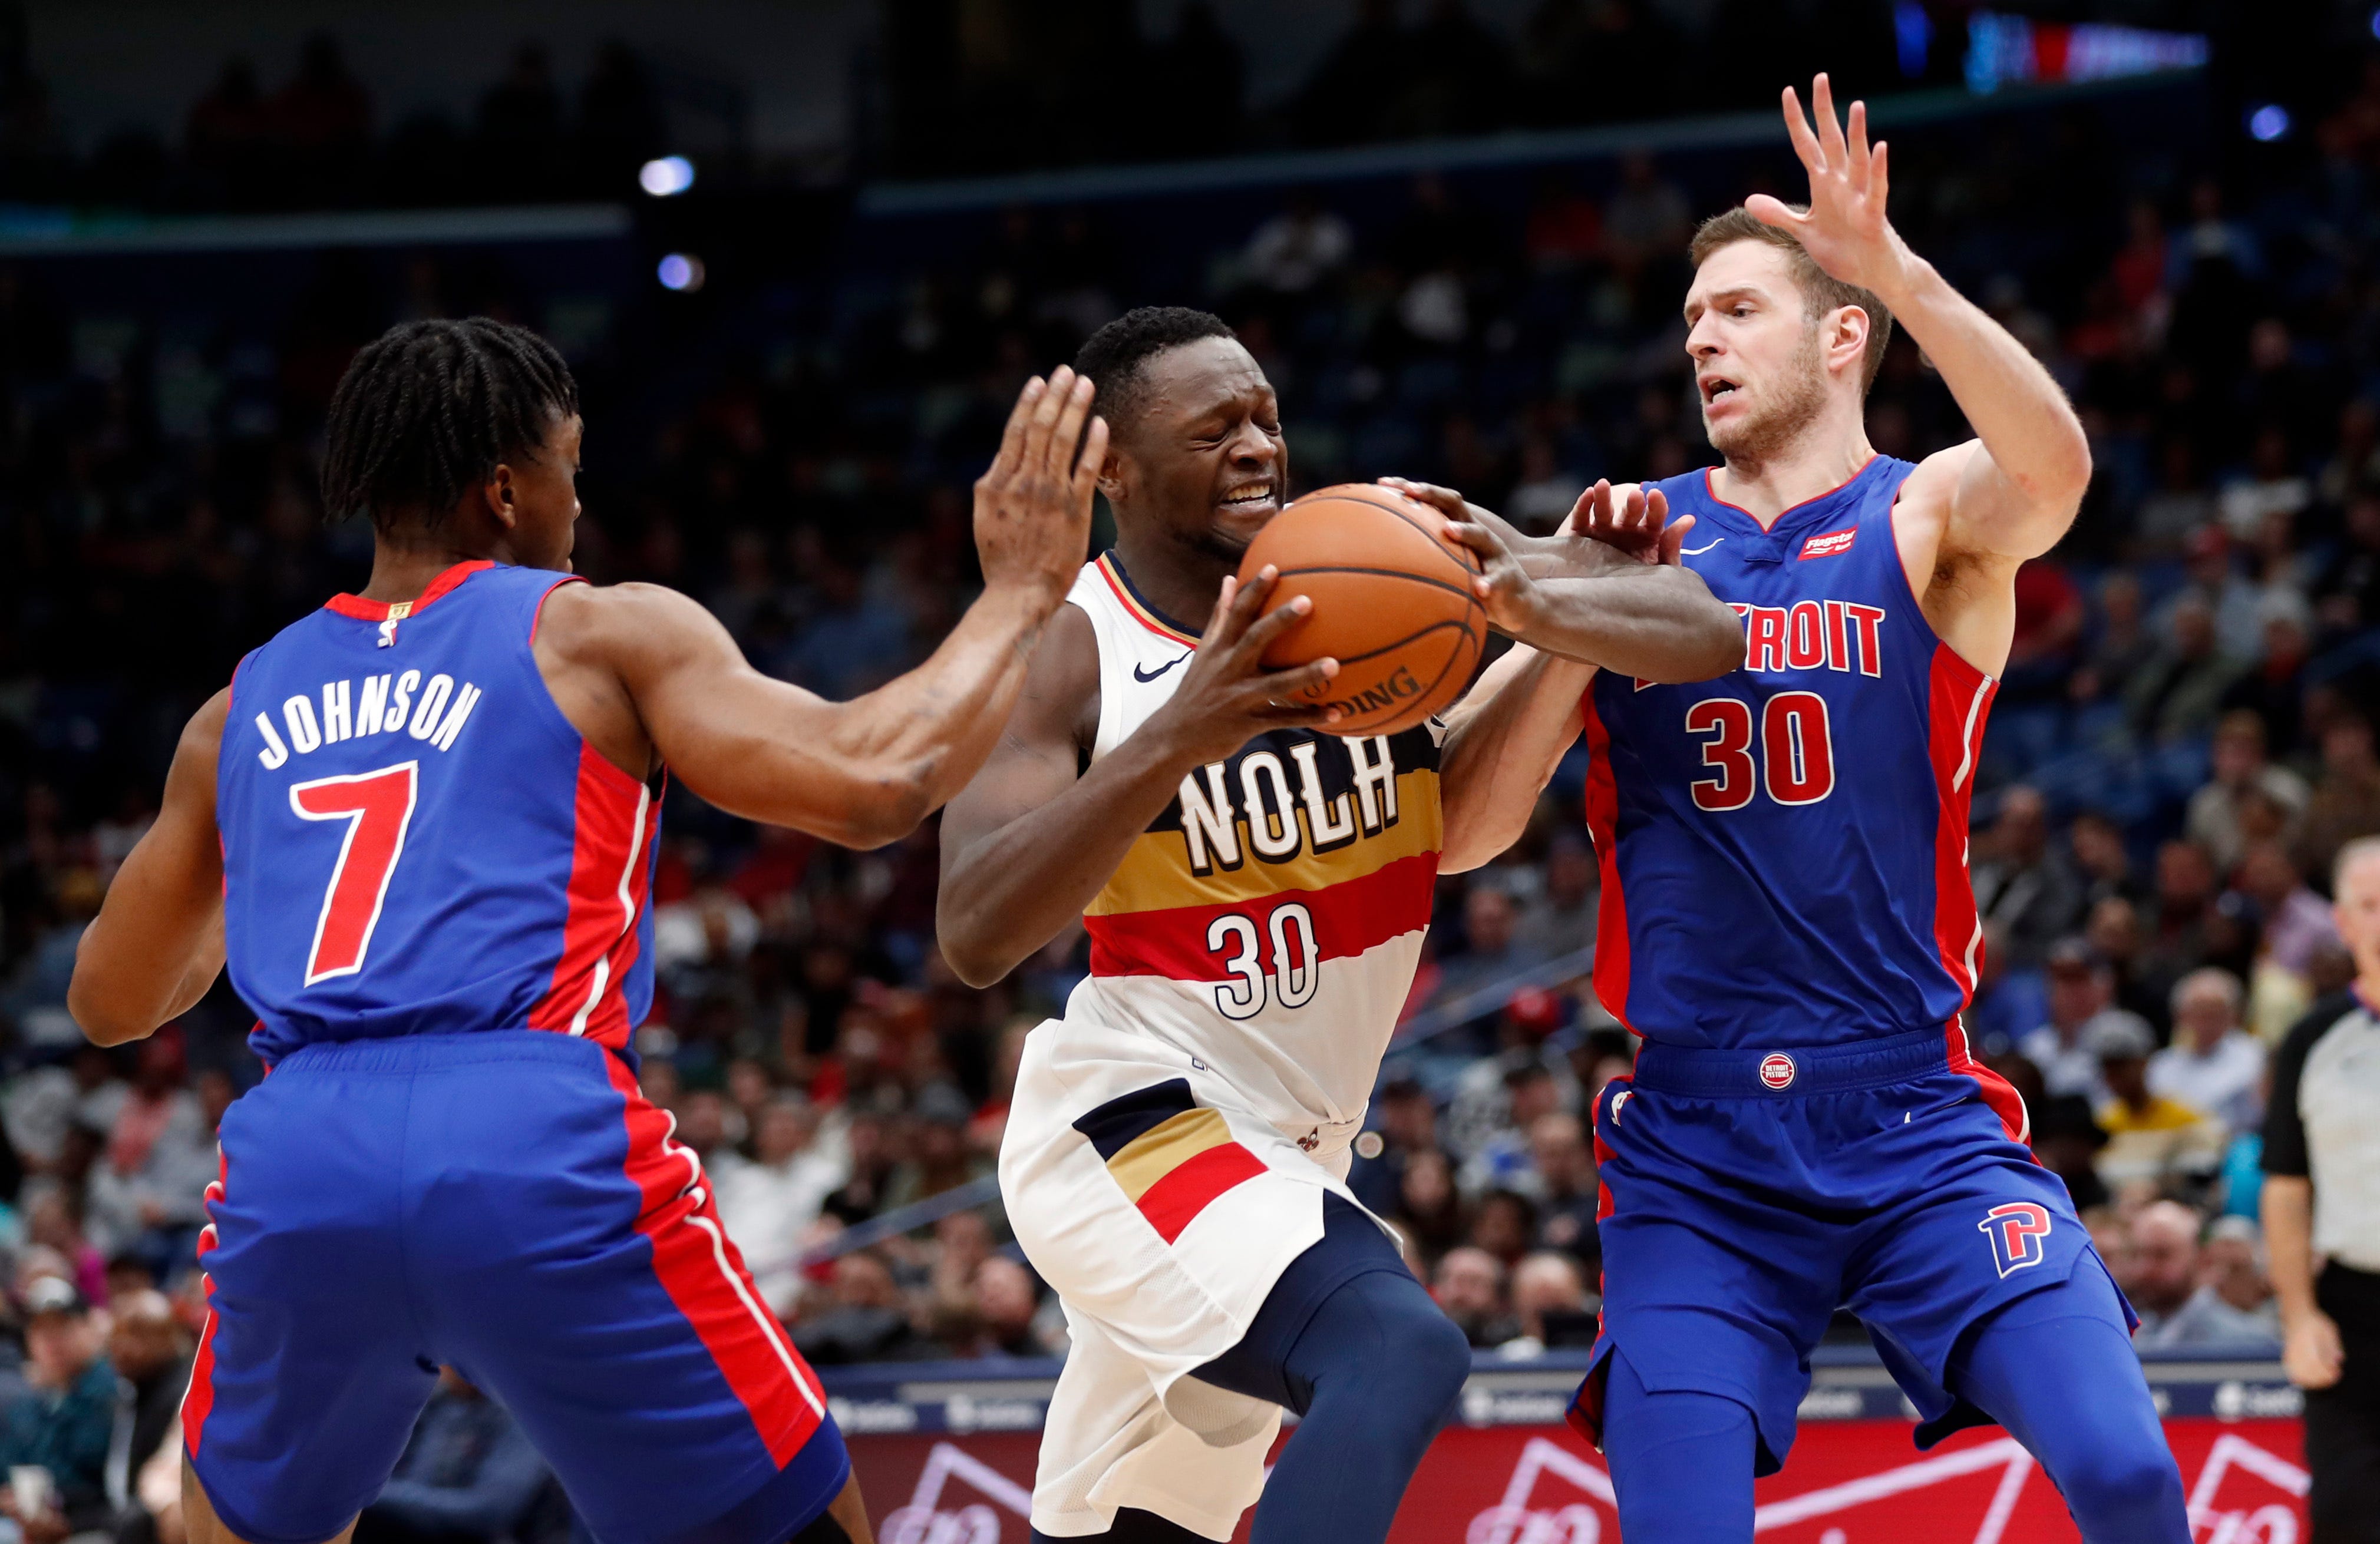 New Orleans Pelicans center Julius Randle (30) drives to the basket between Detroit Pistons forward Stanley Johnson (7) and forward Jon Leuer (30) in the second half.